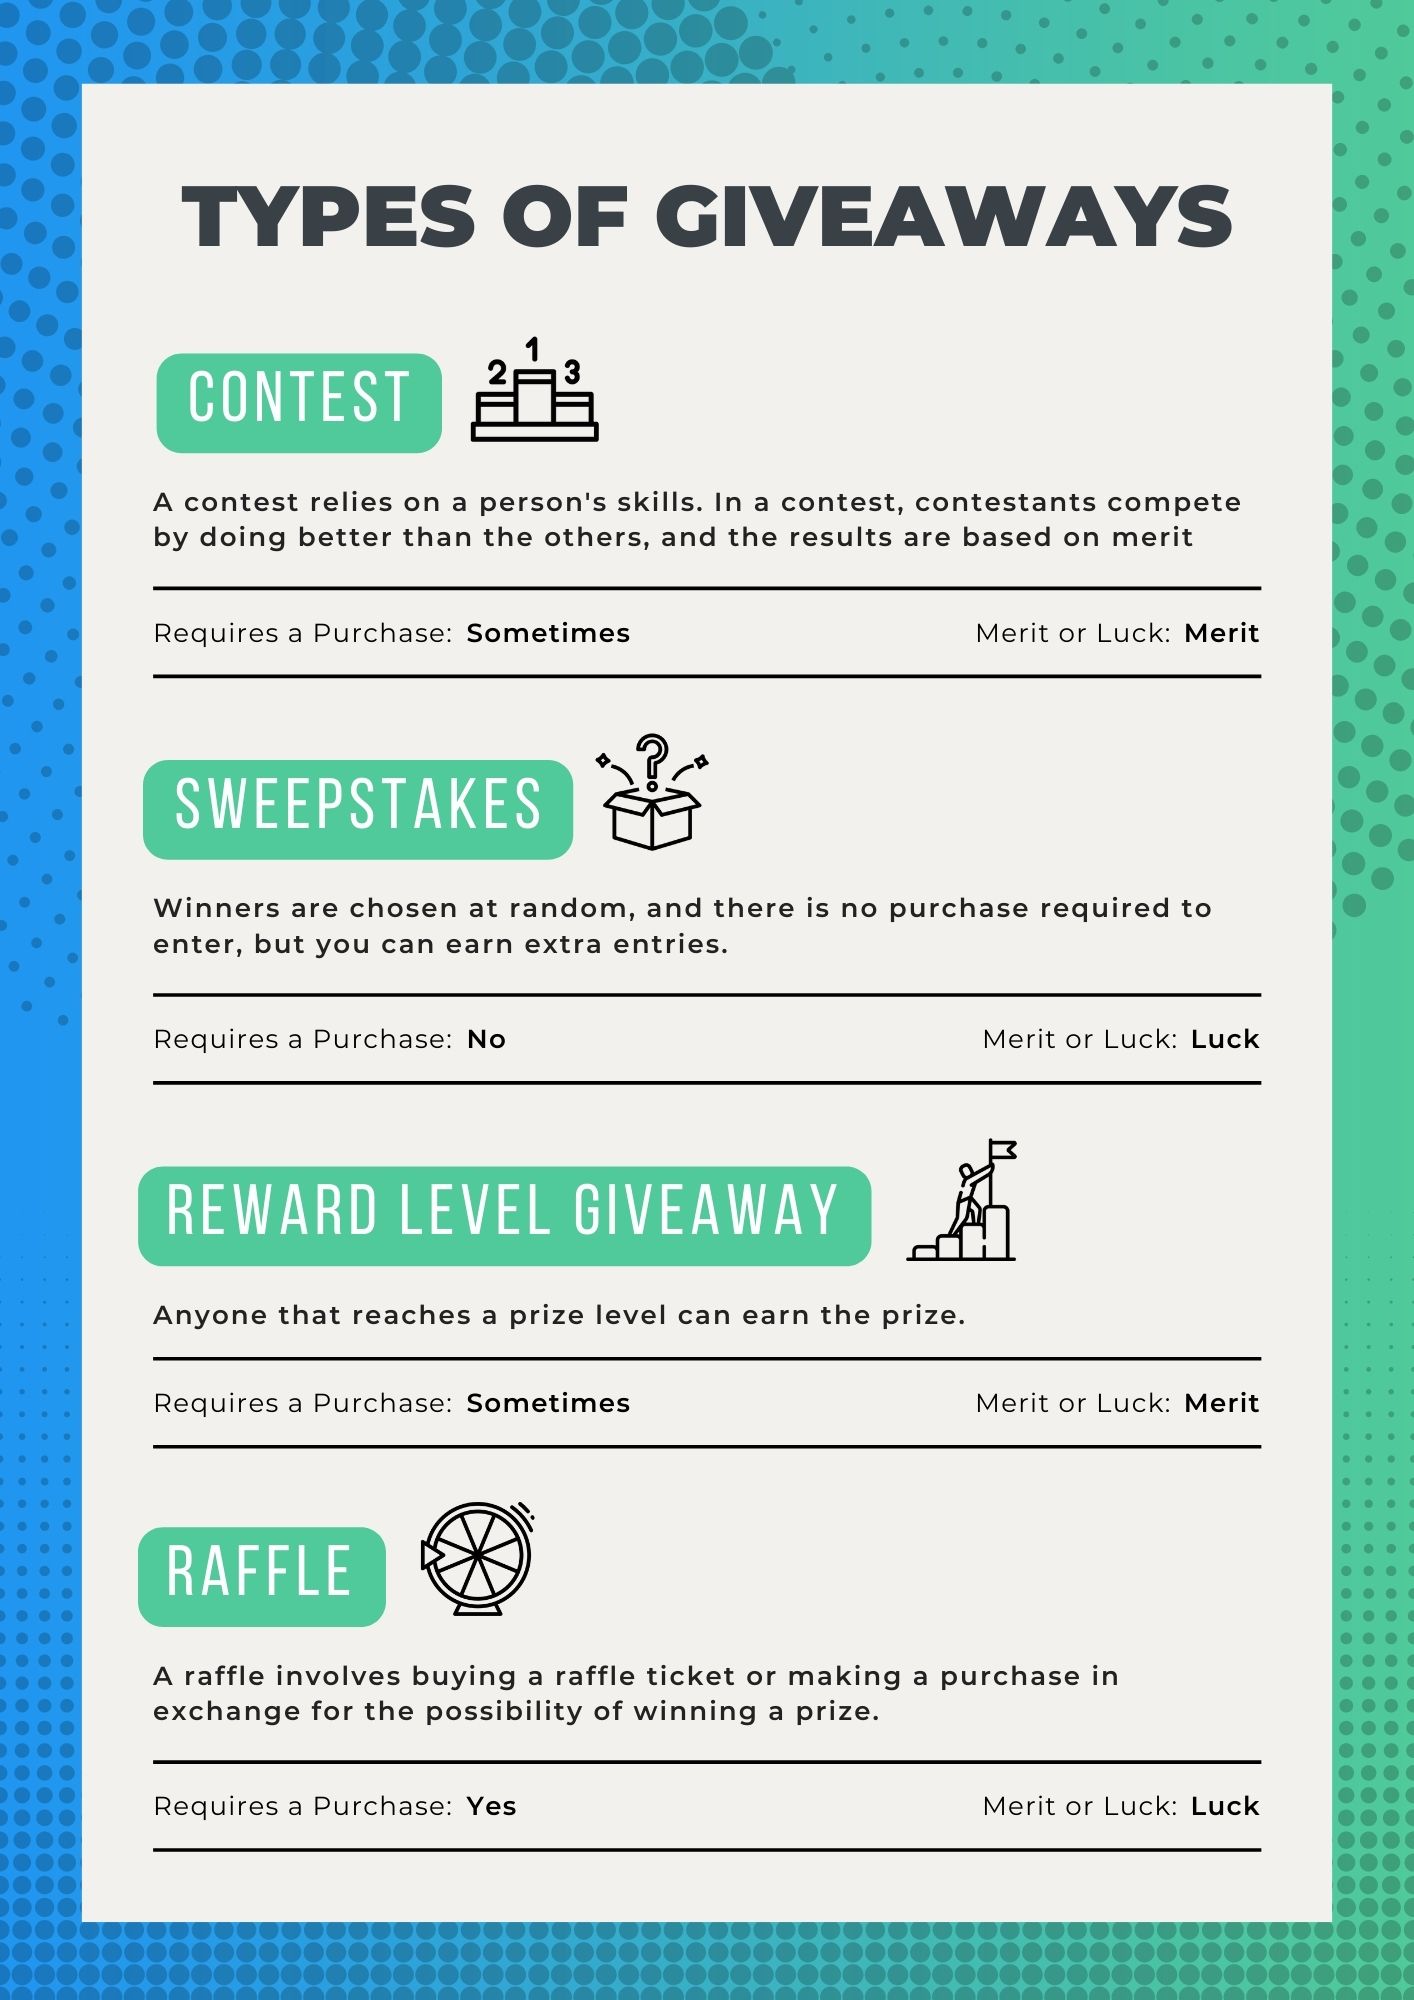 Types of giveaways